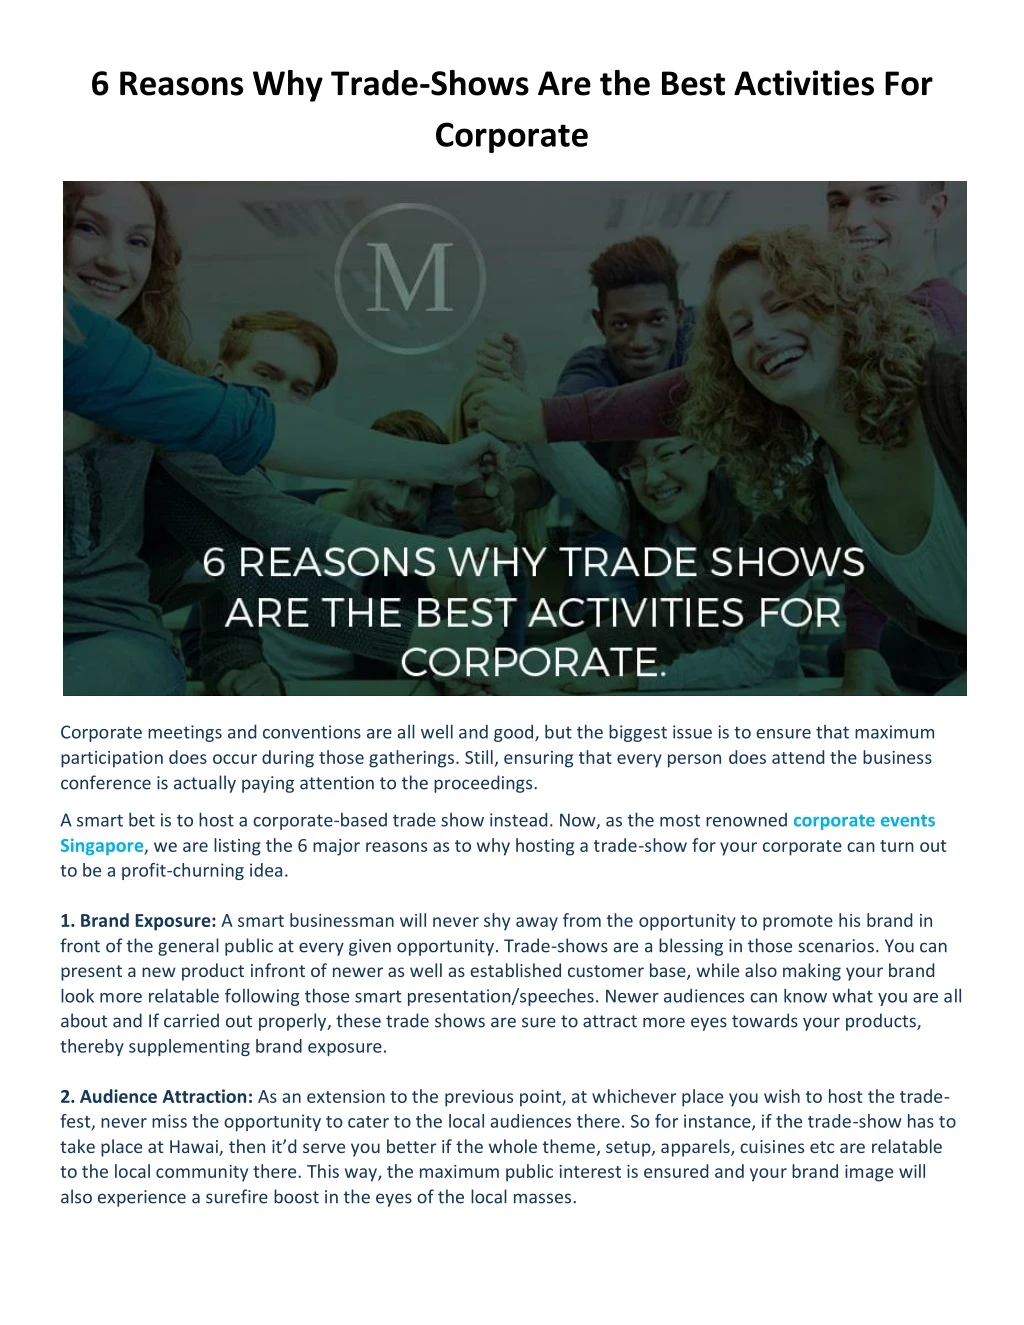 6 reasons why trade shows are the best activities